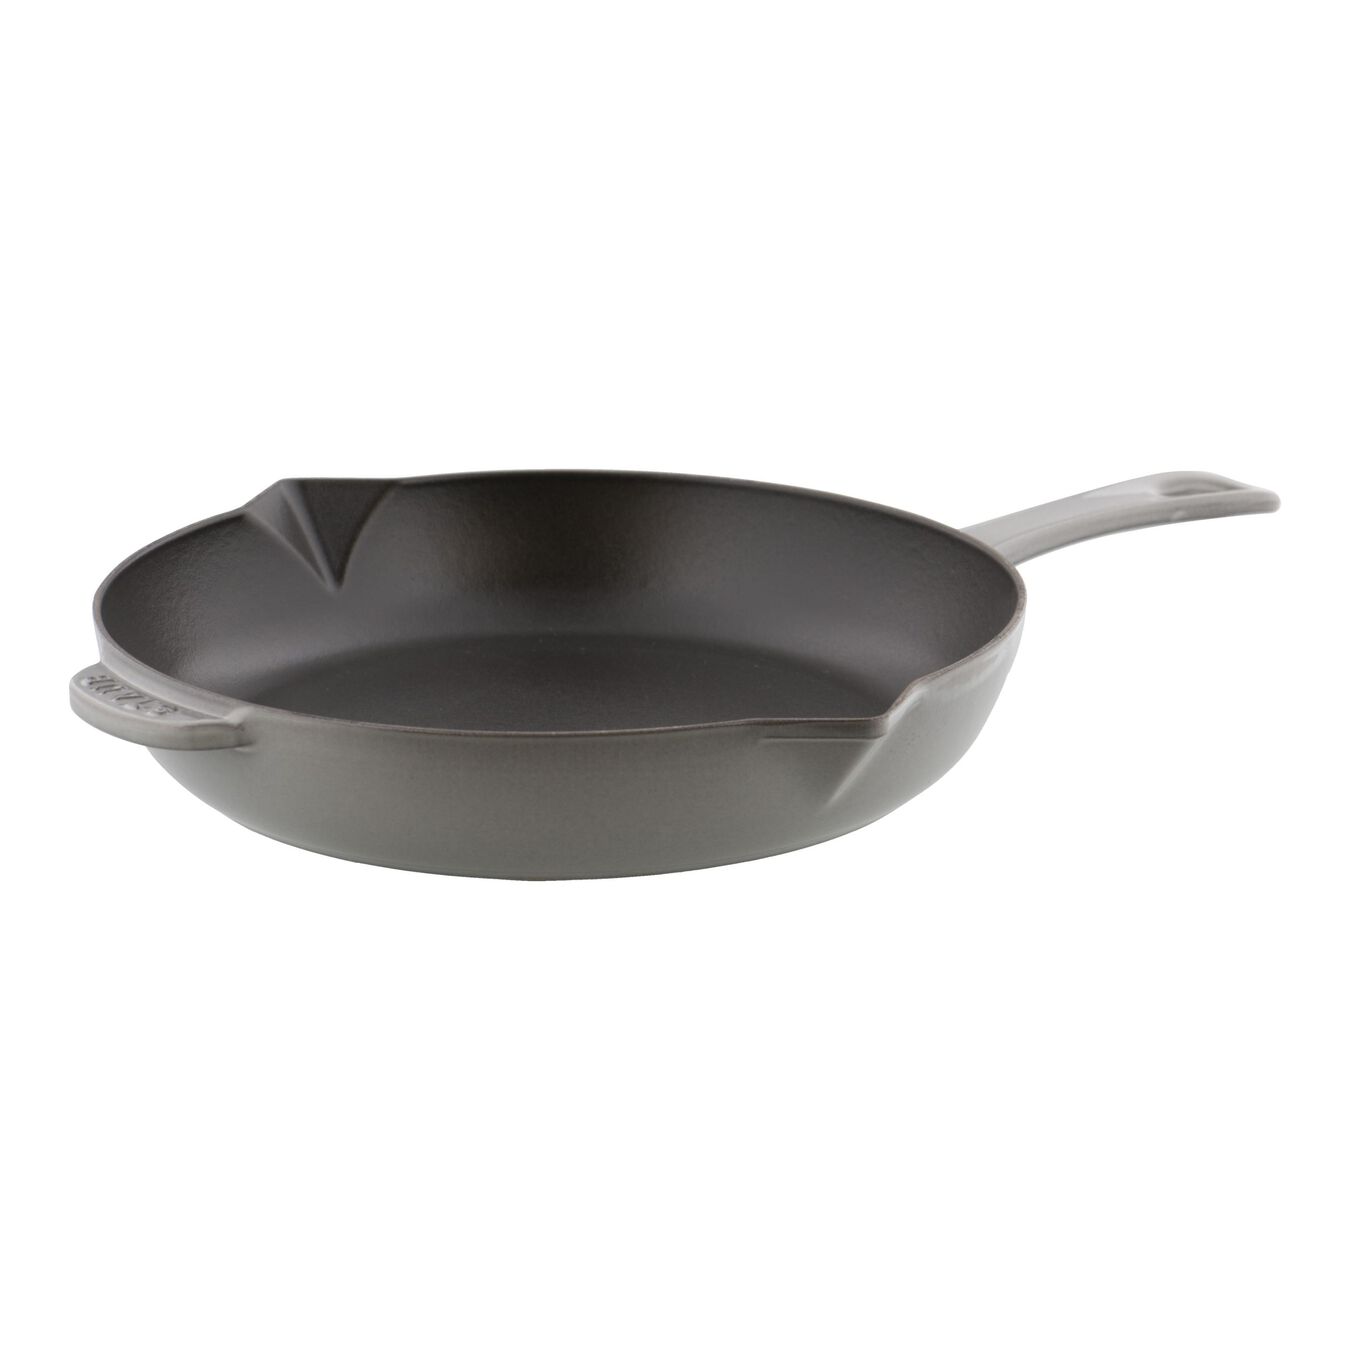 26 cm / 10 inch cast iron Frying pan with pouring spout, graphite-grey,,large 1